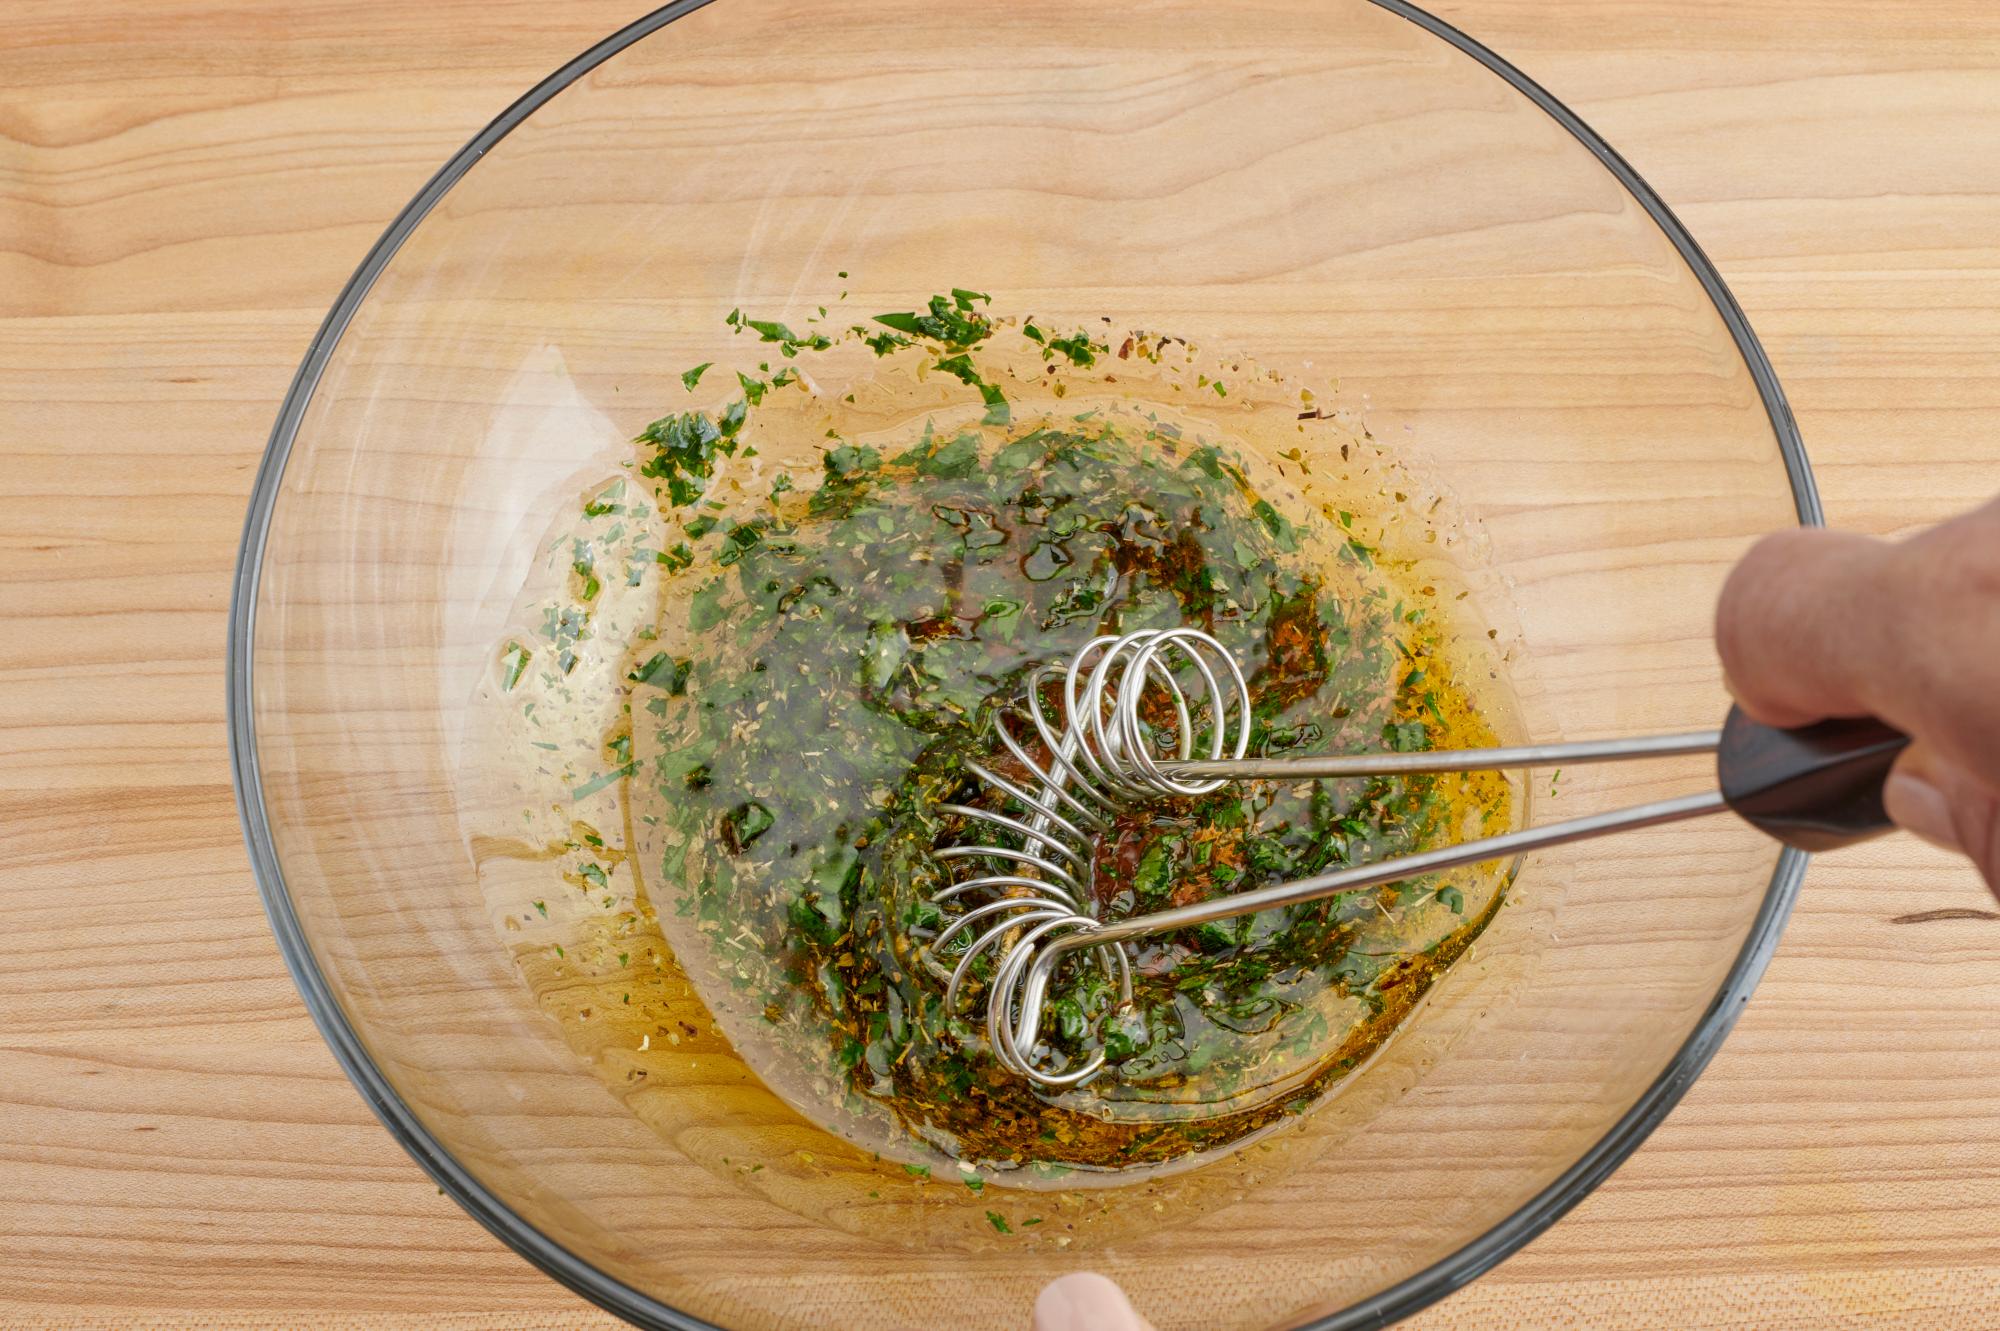 Whisk the dressing with a Mix-Stir.